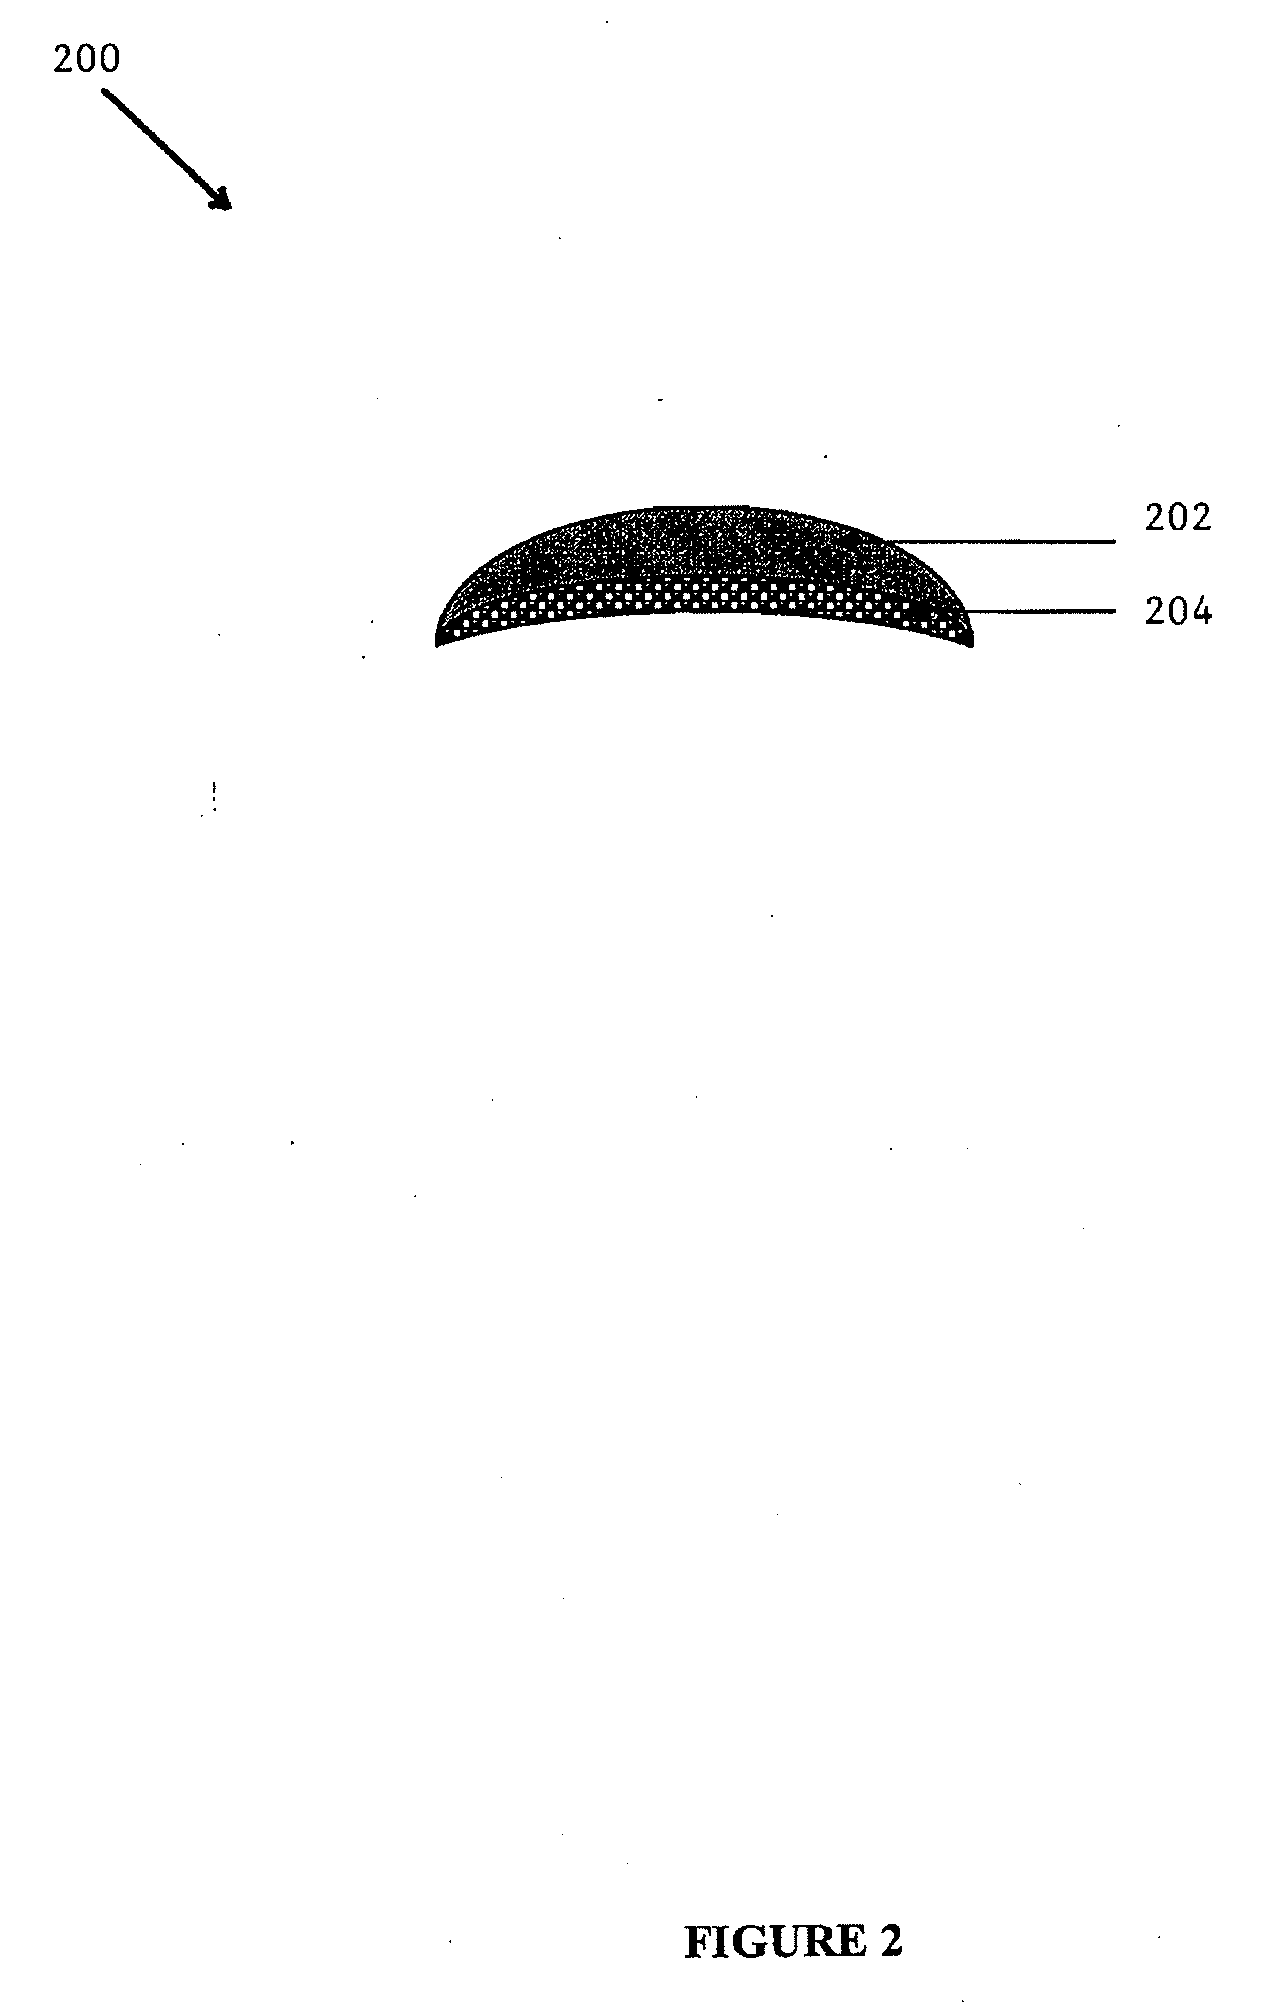 Composite Implants and Methods of Making and Using the Same